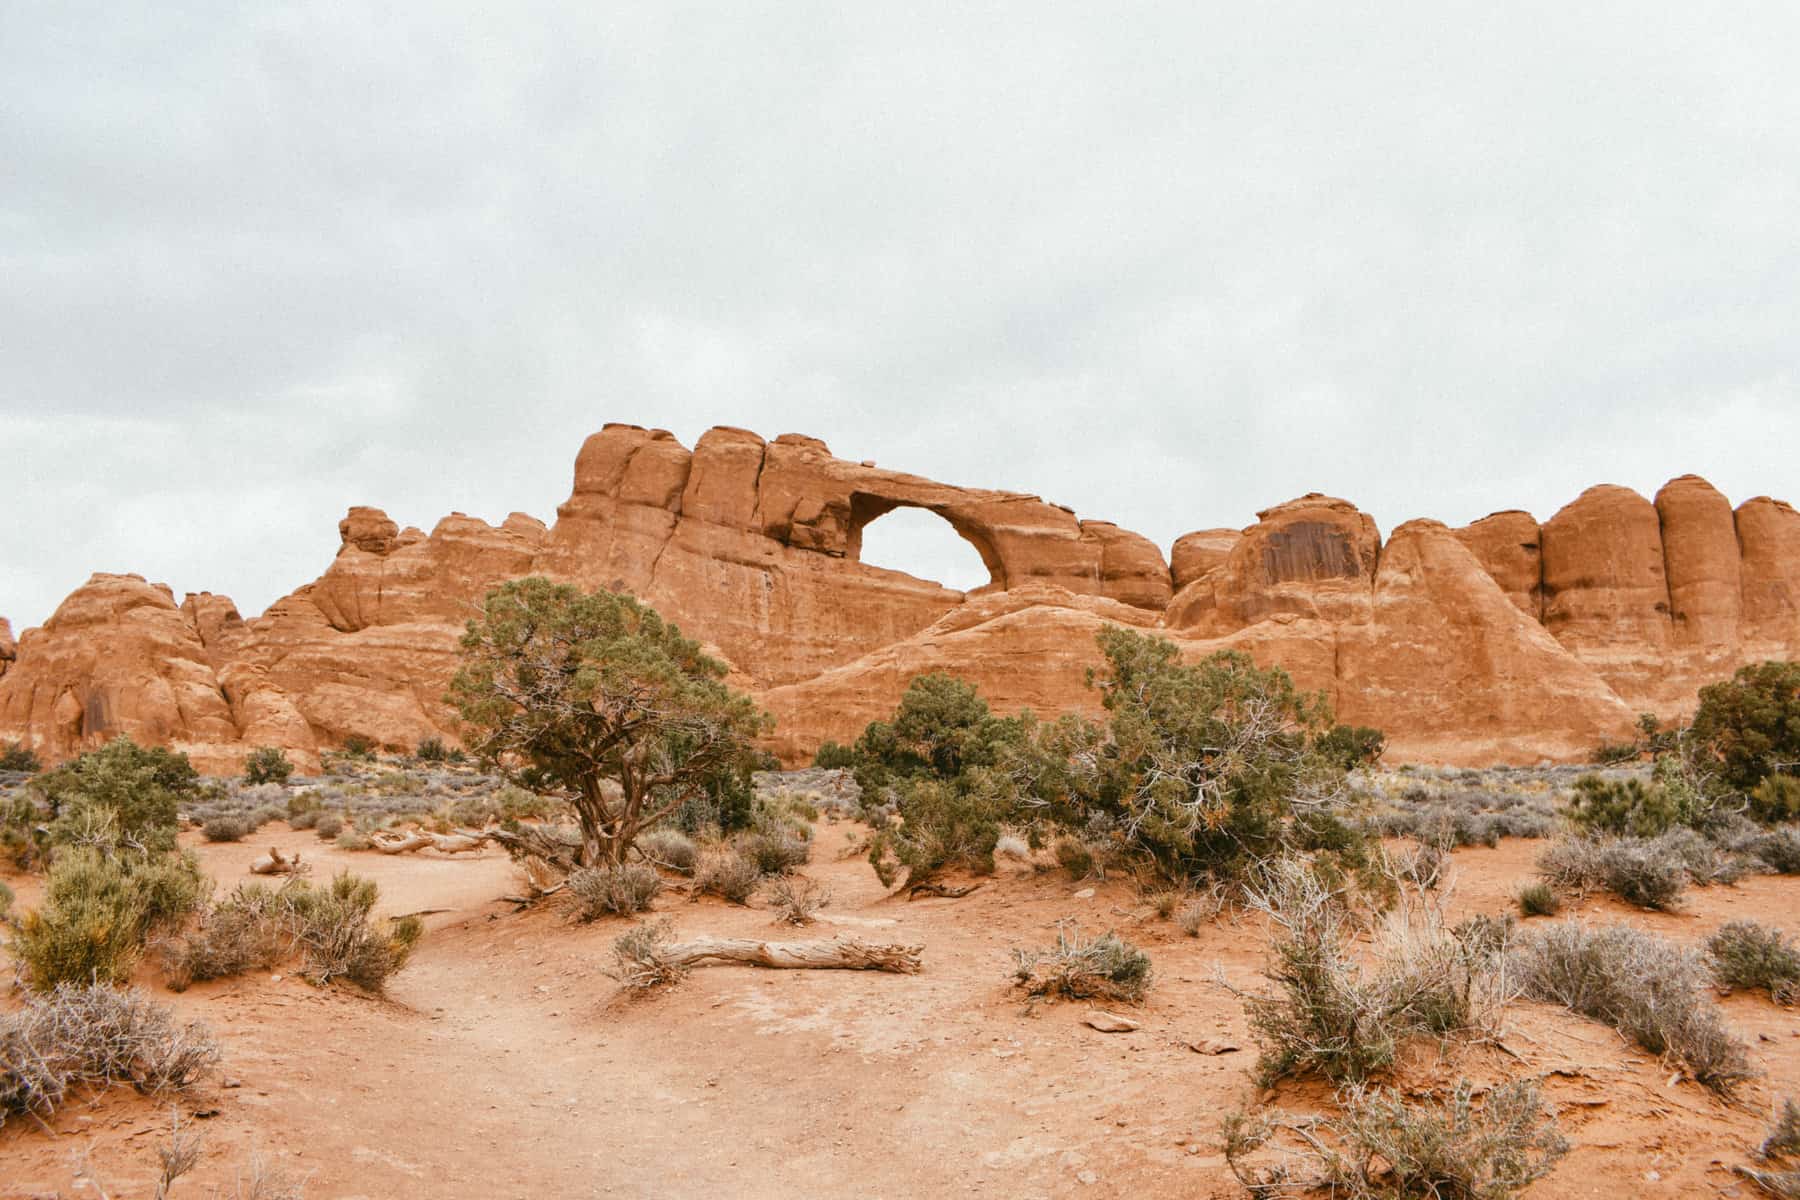 One of the many arches at Arches National Park.